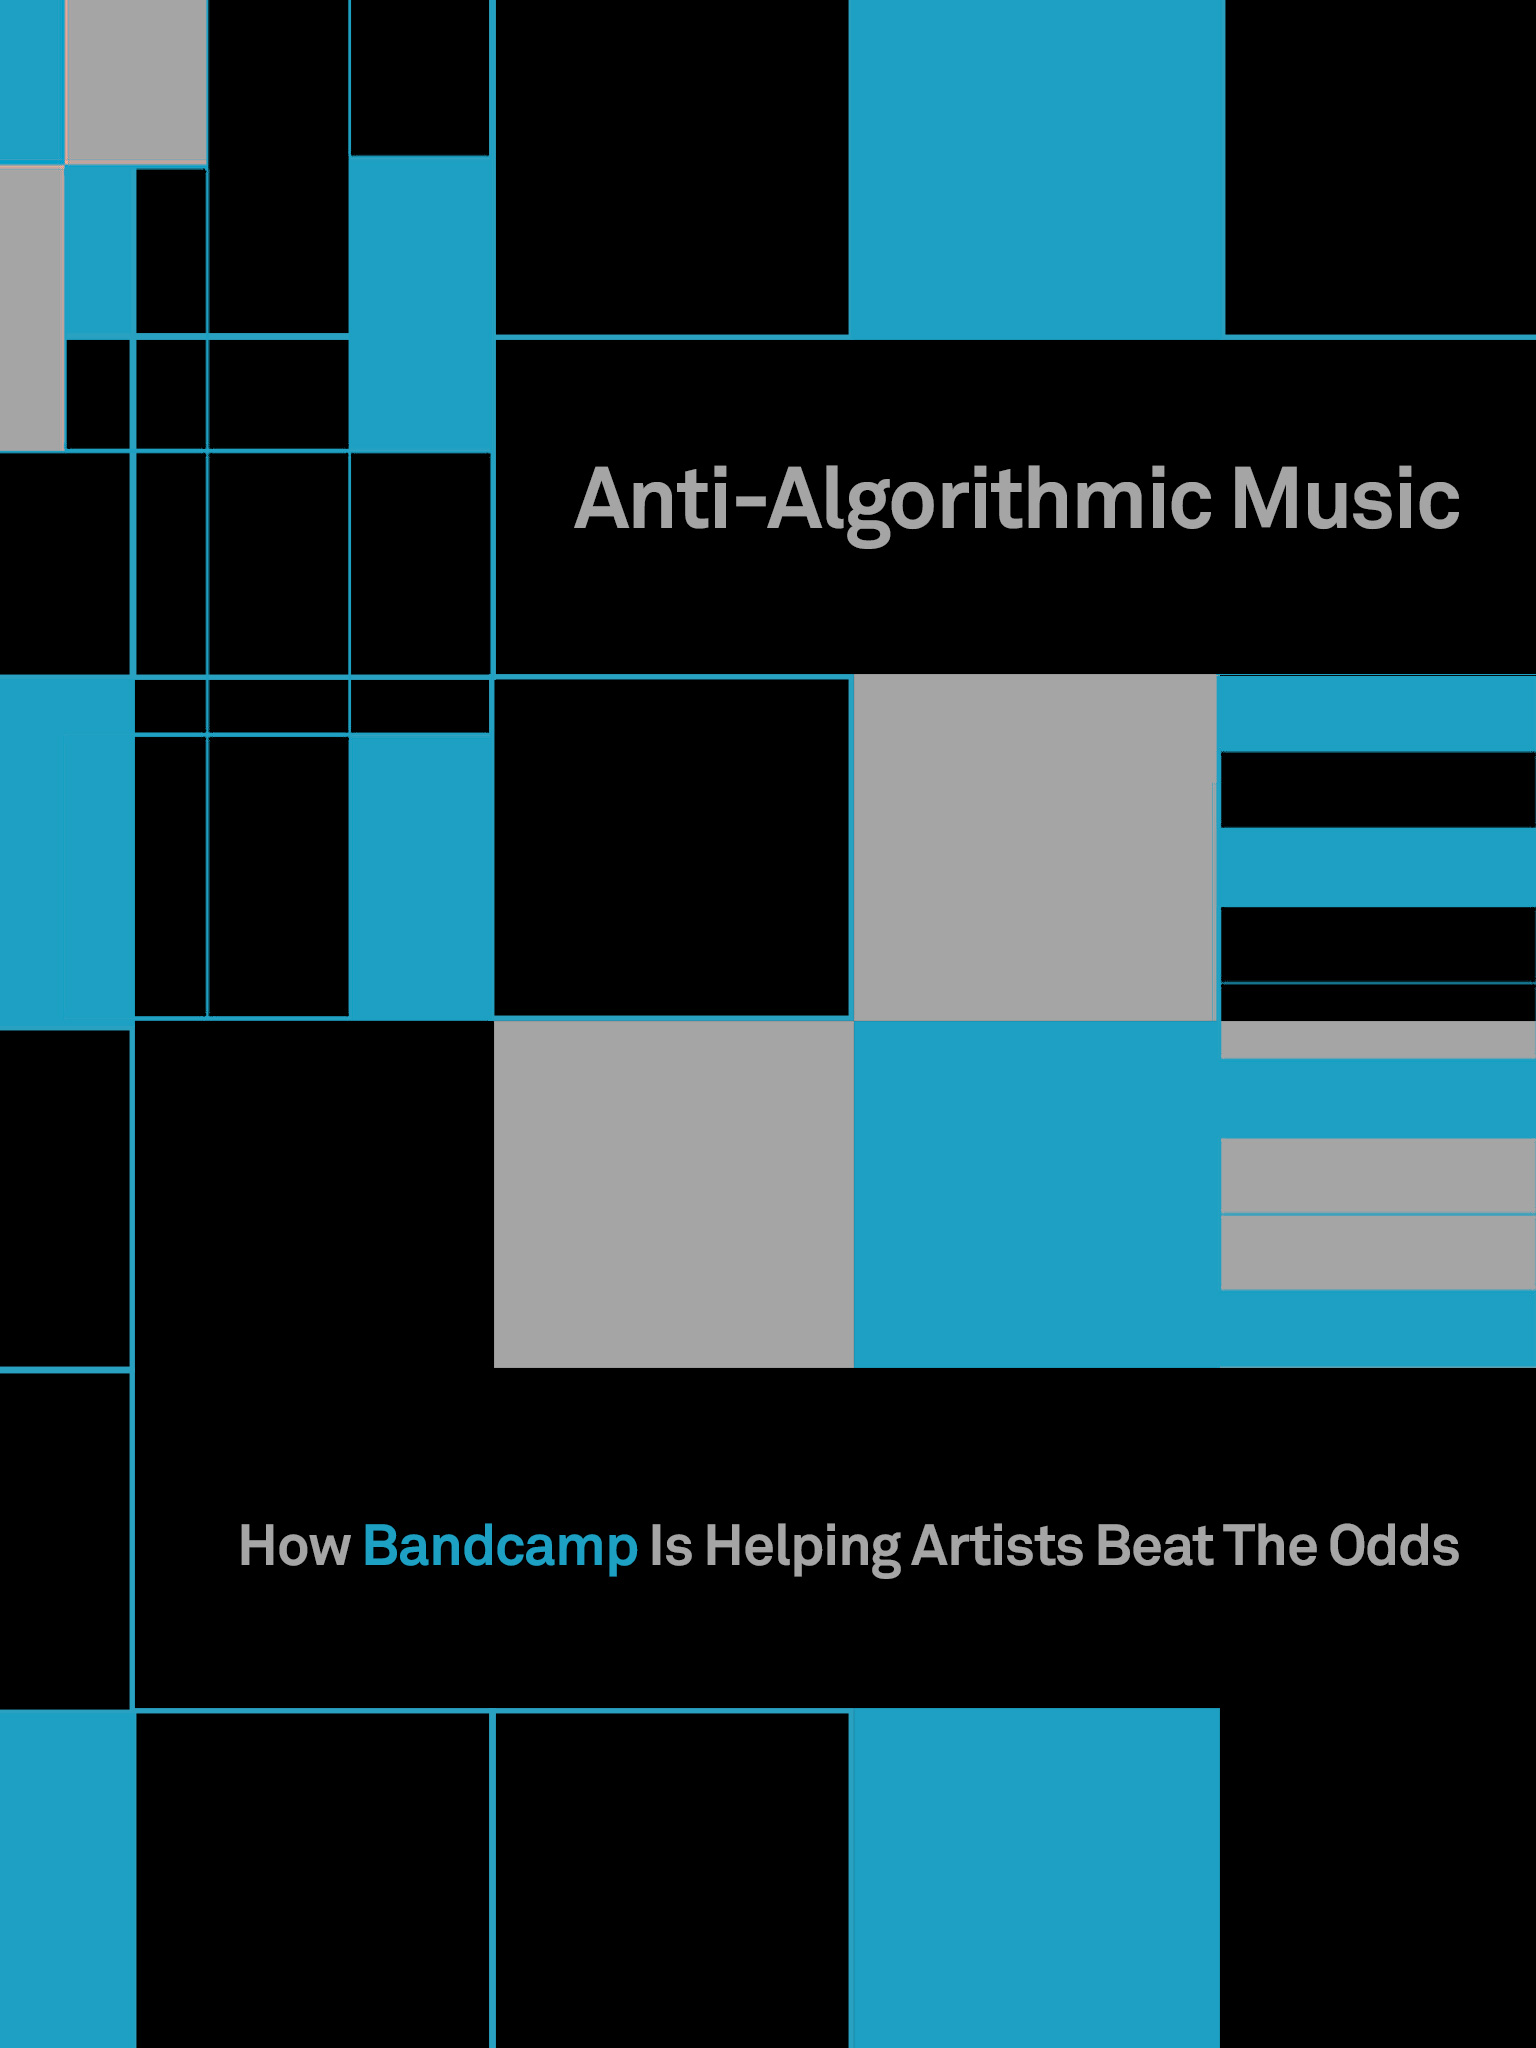 Anti-Algorithmic Music: How Bandcamp Is Helping Artists Beat The Odds